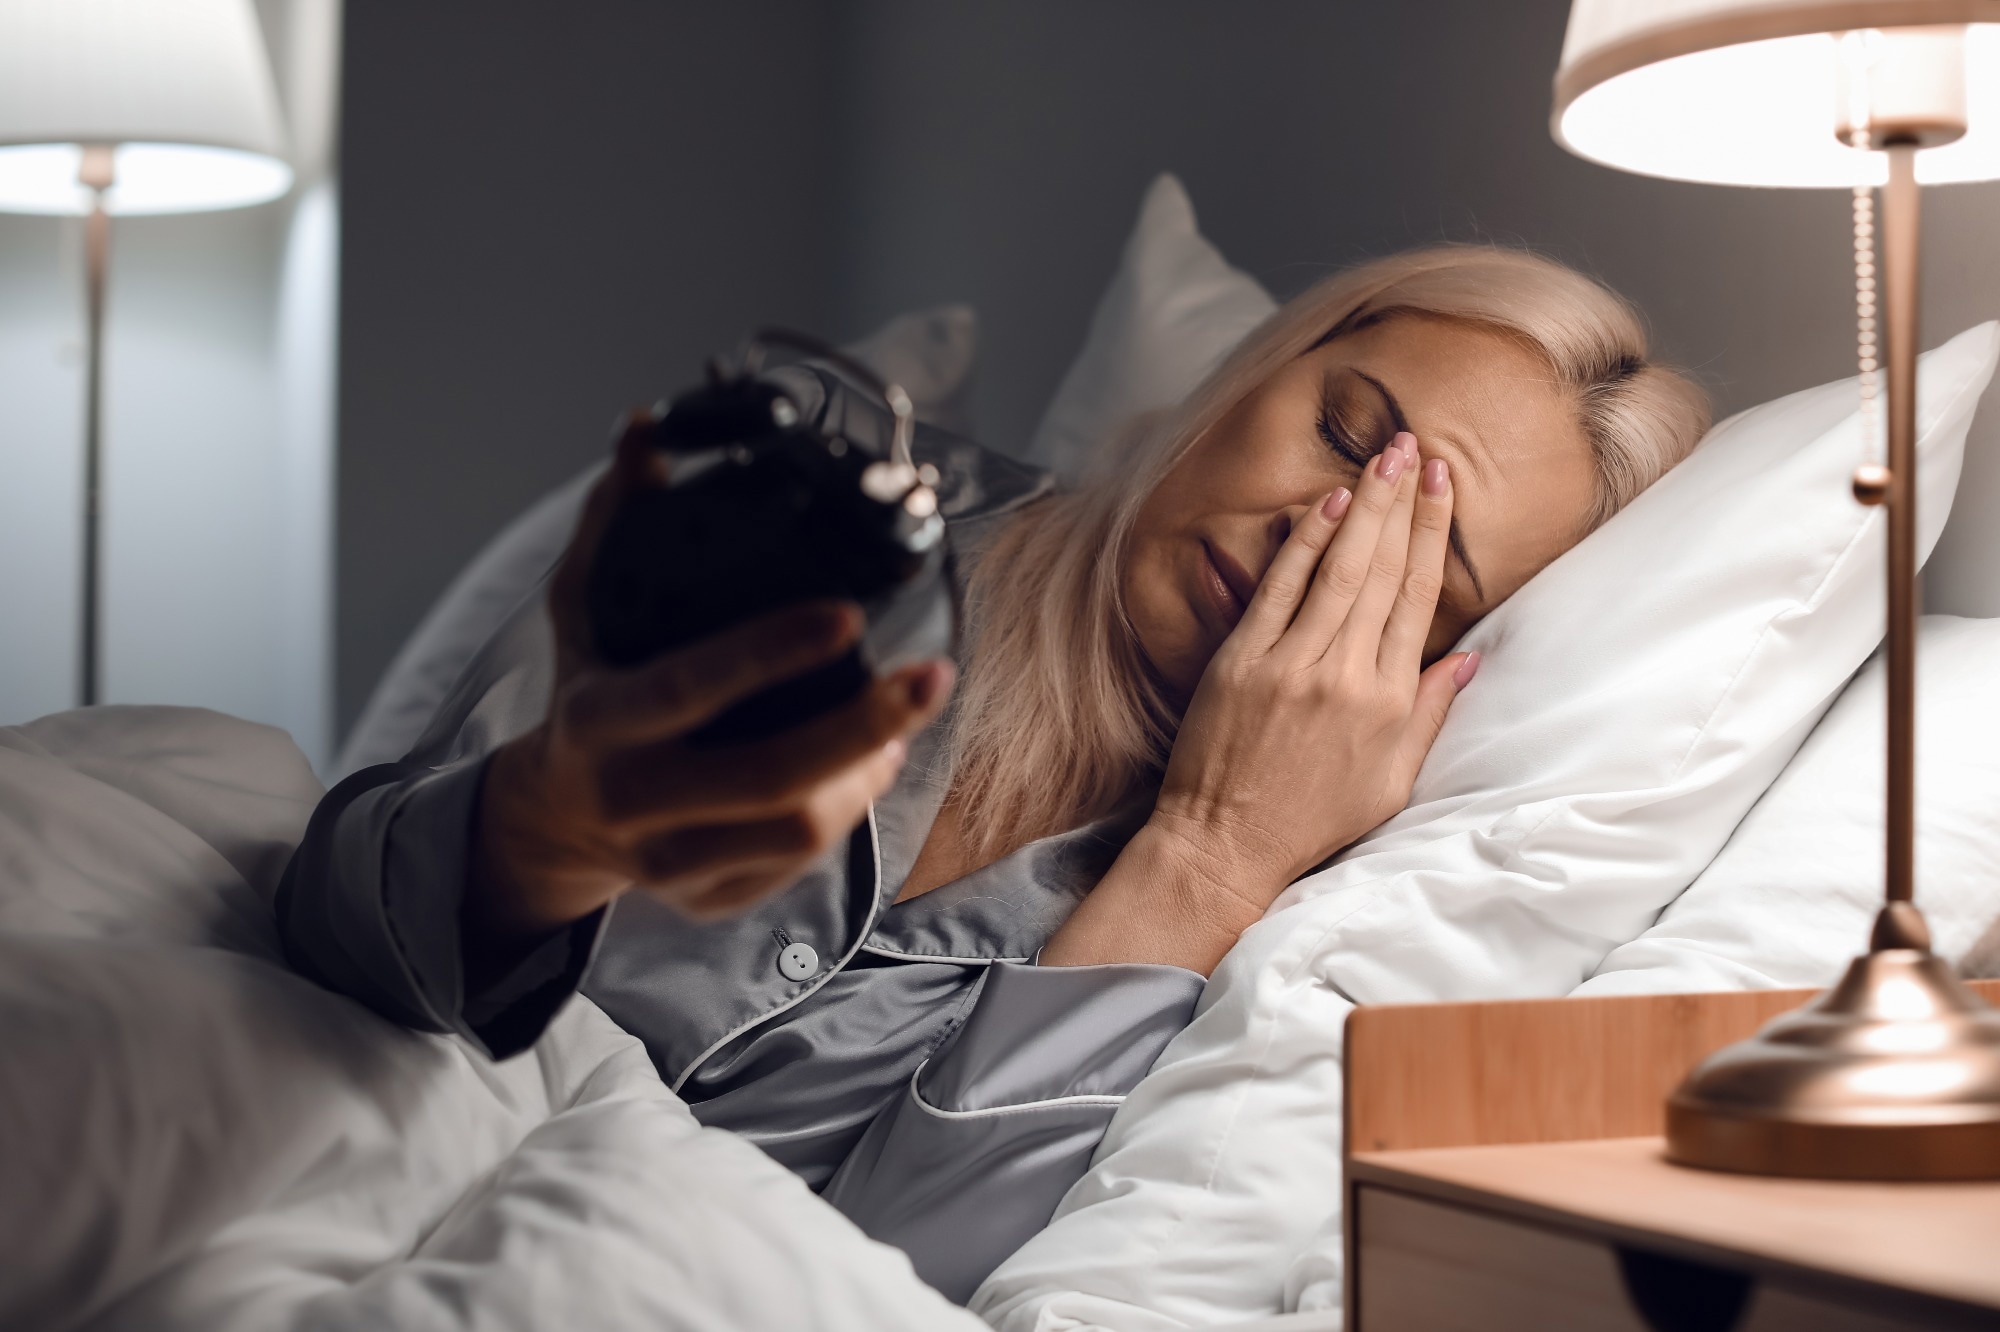 Disturbances in sleep patterns increase the risk of depression in midlife women